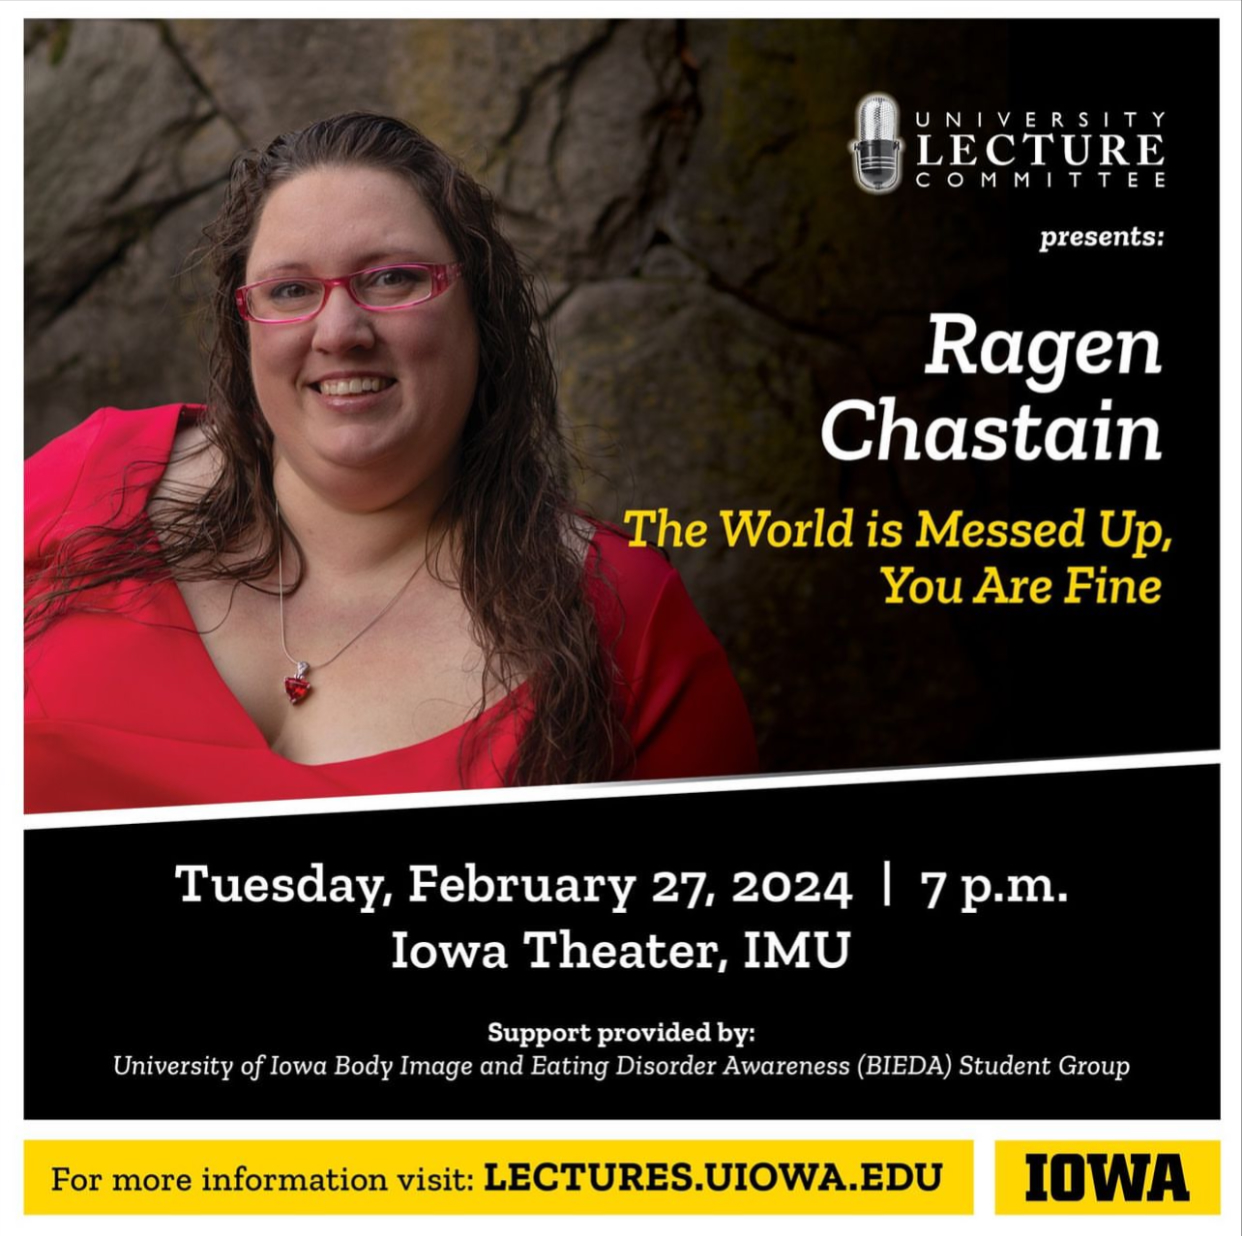 University Lecture Committee, Ragen Chastain. The world is messed up, you are fine. Tuesday, February 27, 2024. 7 pm. Iowa Theater, IMU. Support provided by University of Iowa Body Image and Eating Disorder Awareness (BIEDA) Student Group. 